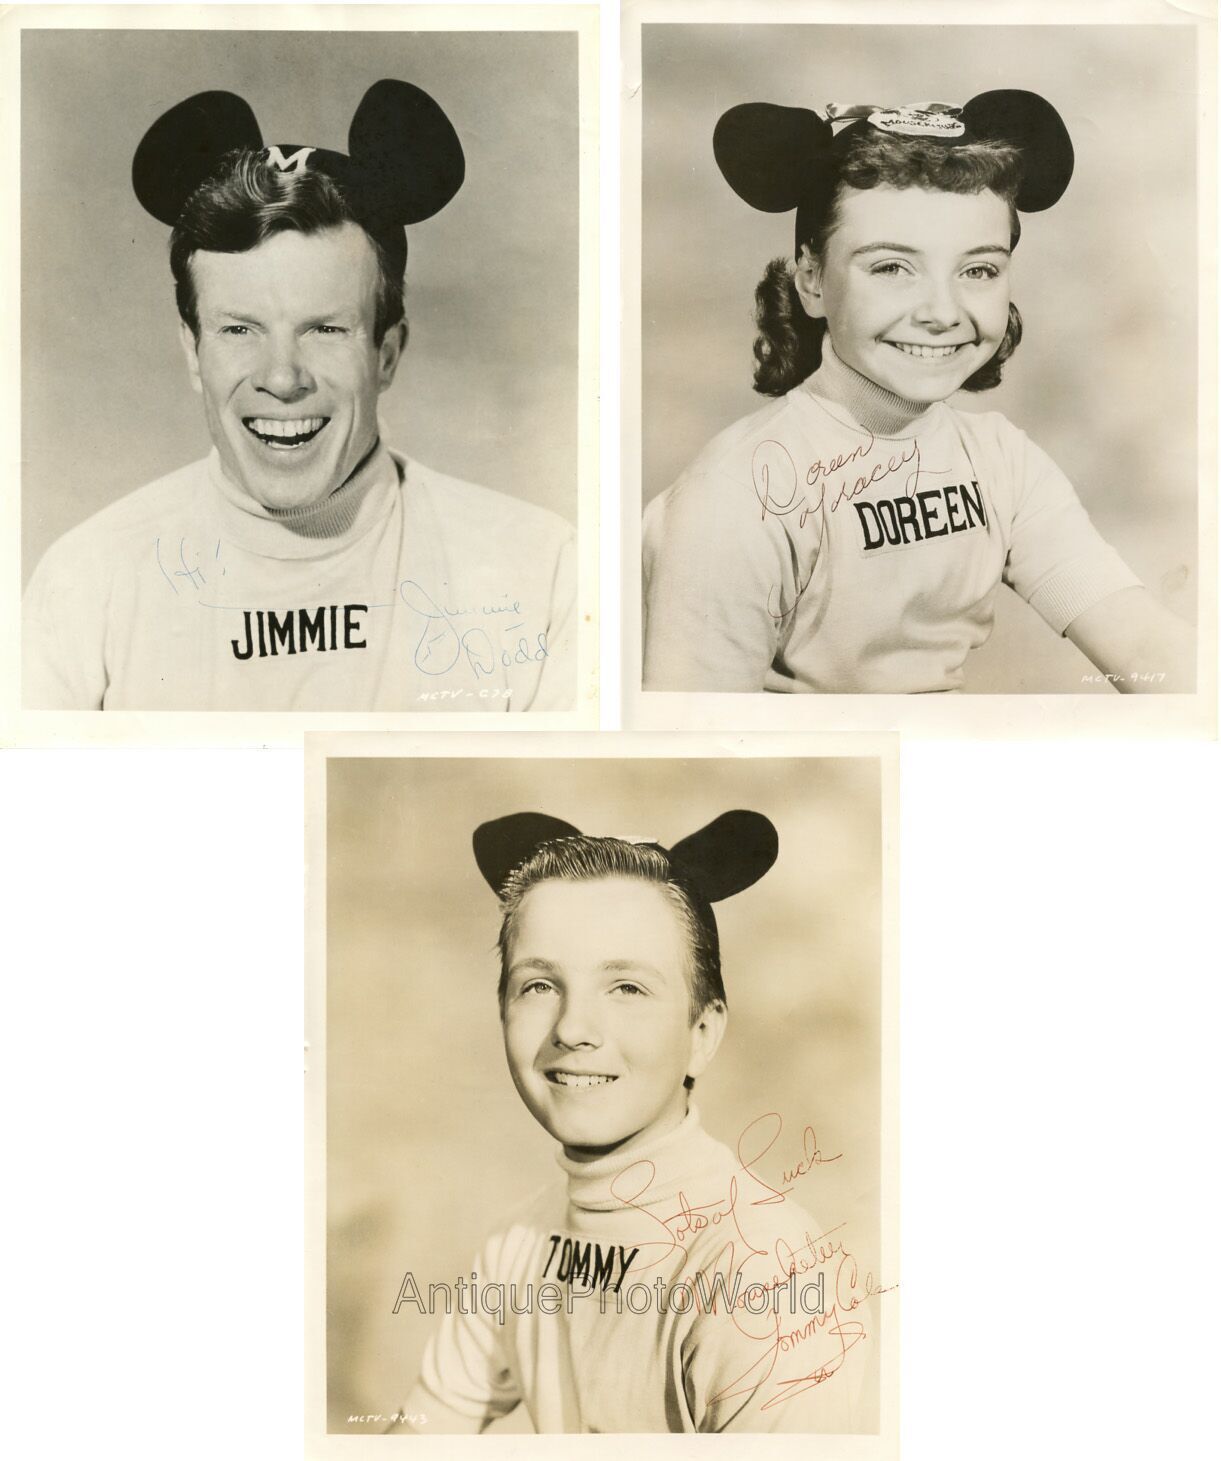 Mickey Mouse Club mouseketeers Jimmie Dodd Dorreen Tommy 3 signed photos